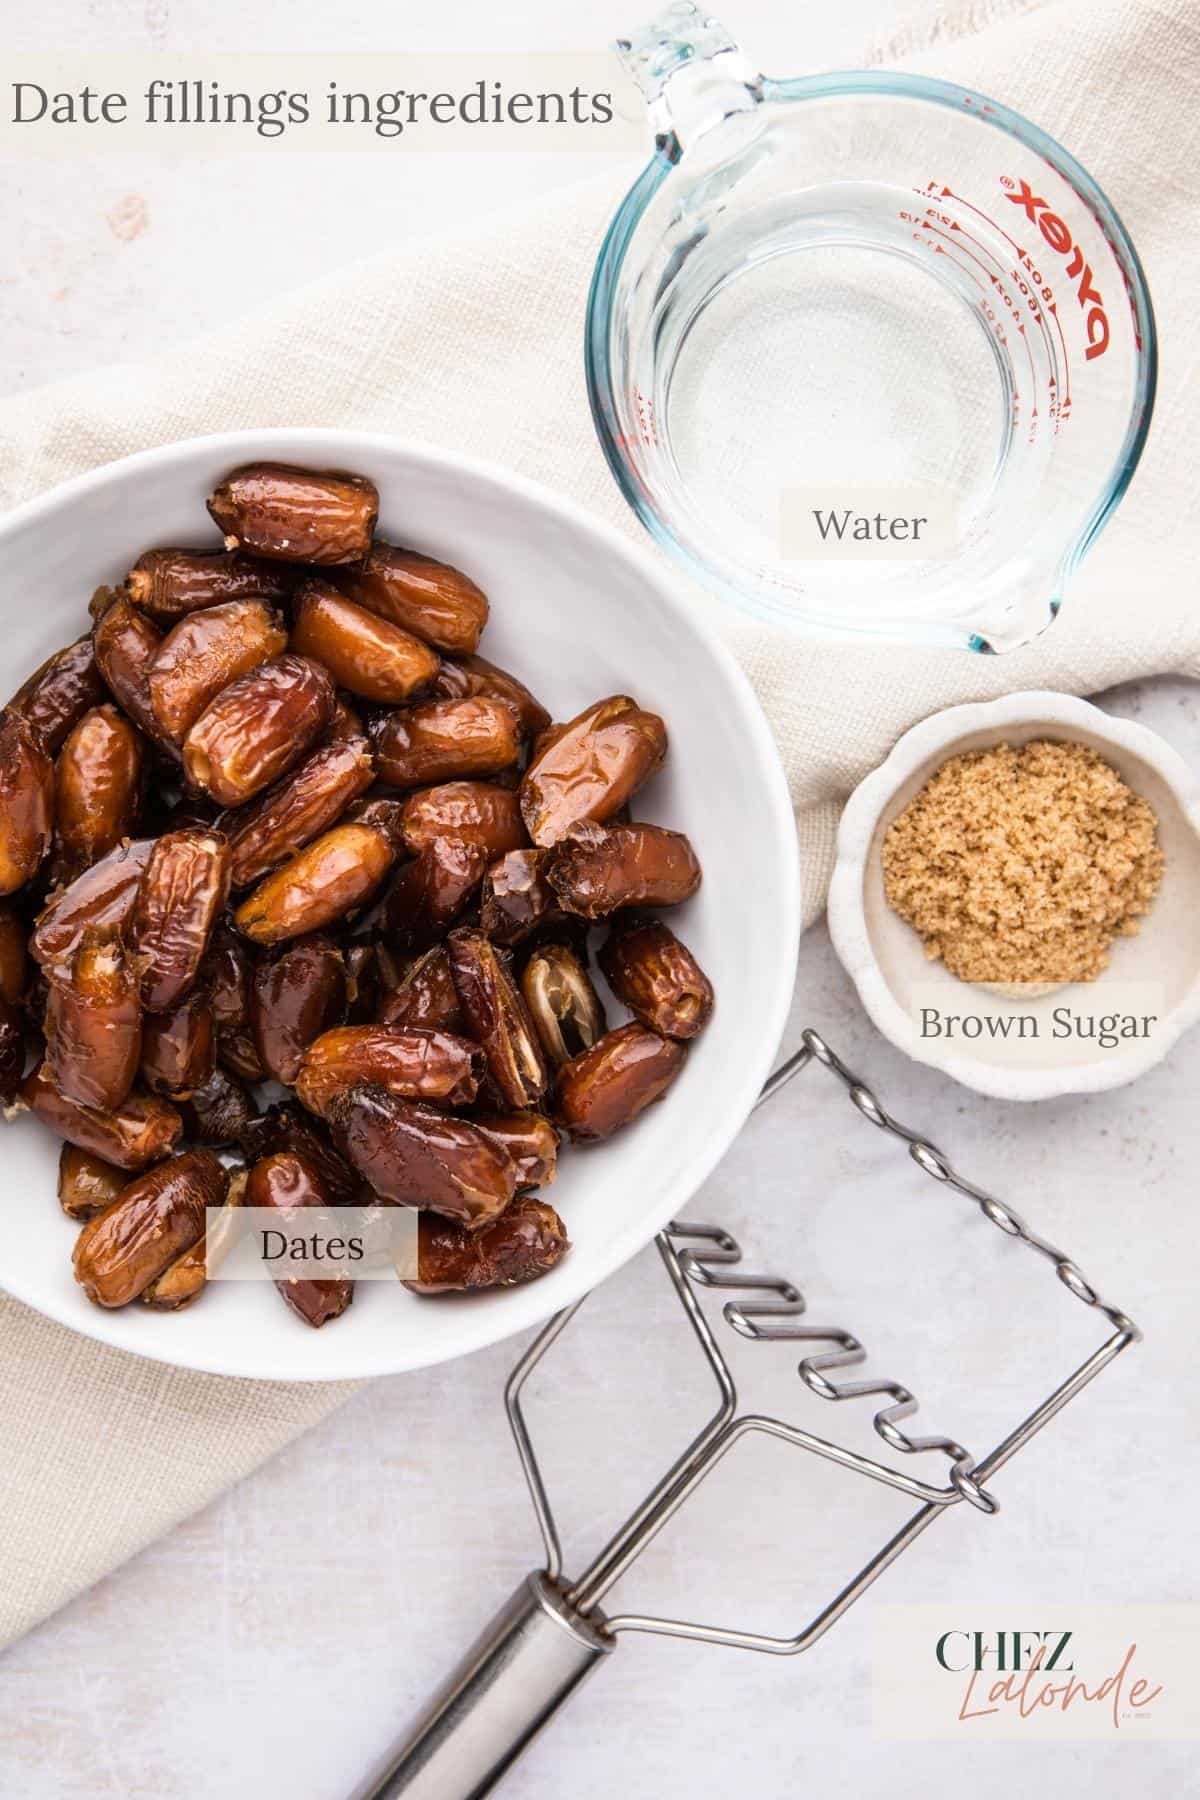 A bowl of dates next to a measuring cup, potato mashers and a bowl of brown sugar.